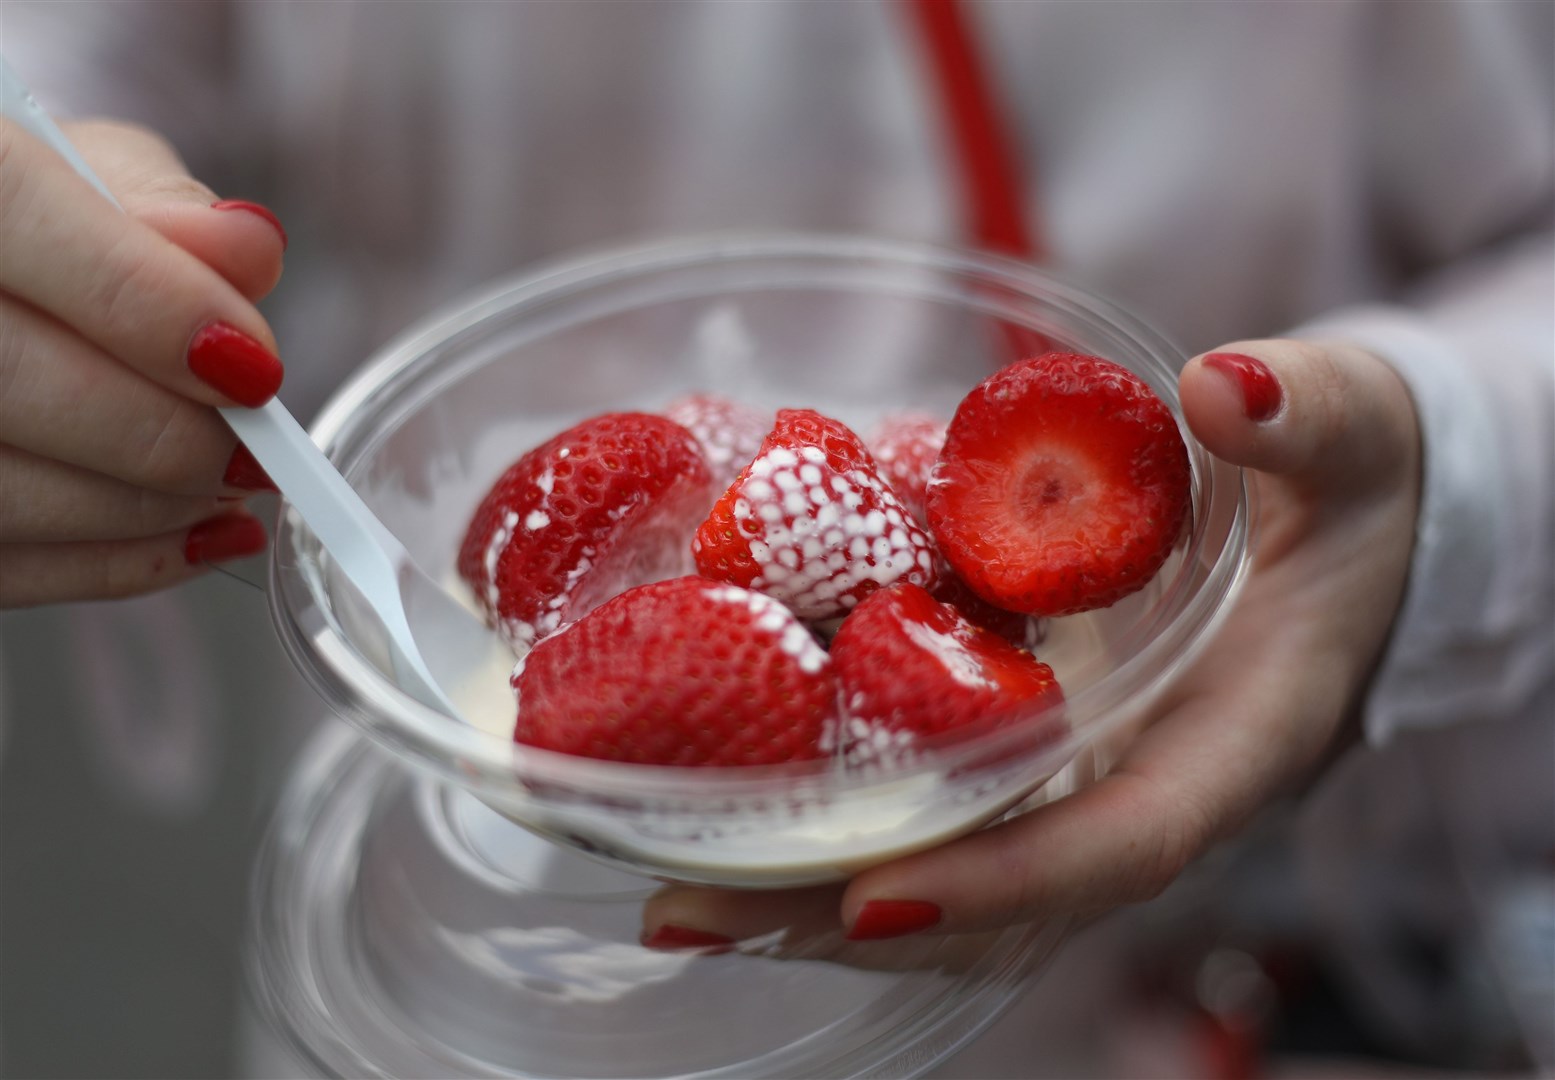 A visitor enjoys a bowl of strawberries and cream at the Wimbledon Championships (Philip Toscano/PA)